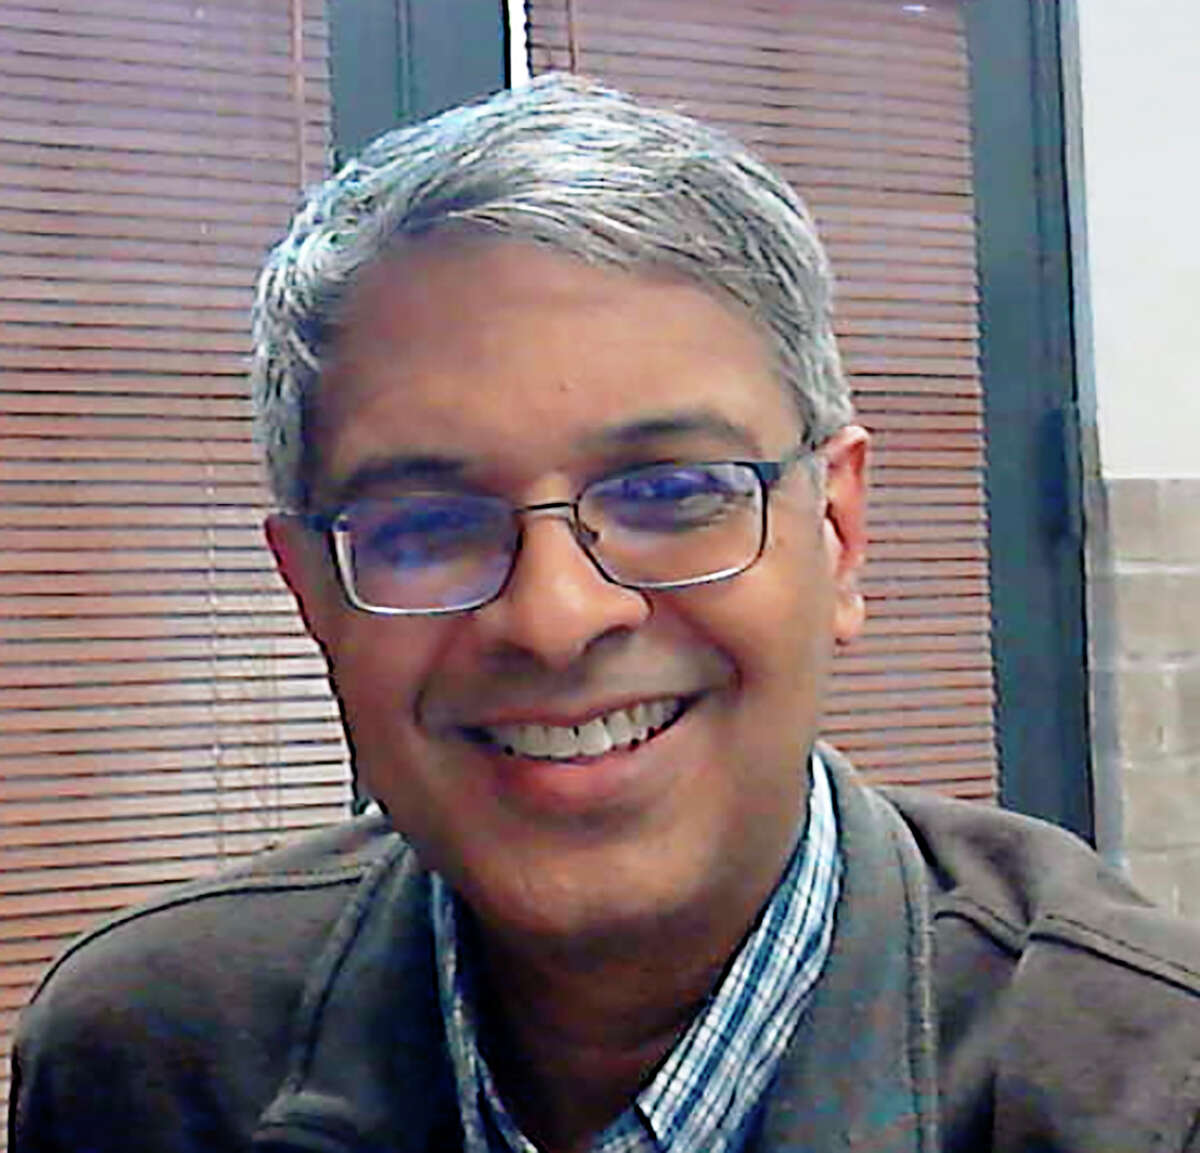 Dr. Jay Bhattacharya, professor of medicine at Stanford University, is one of the authors of the Great Barrington Declaration, a document released on Oct. 5, 2020, that advocates eliminating lockdowns as a strategy against COVID-19.